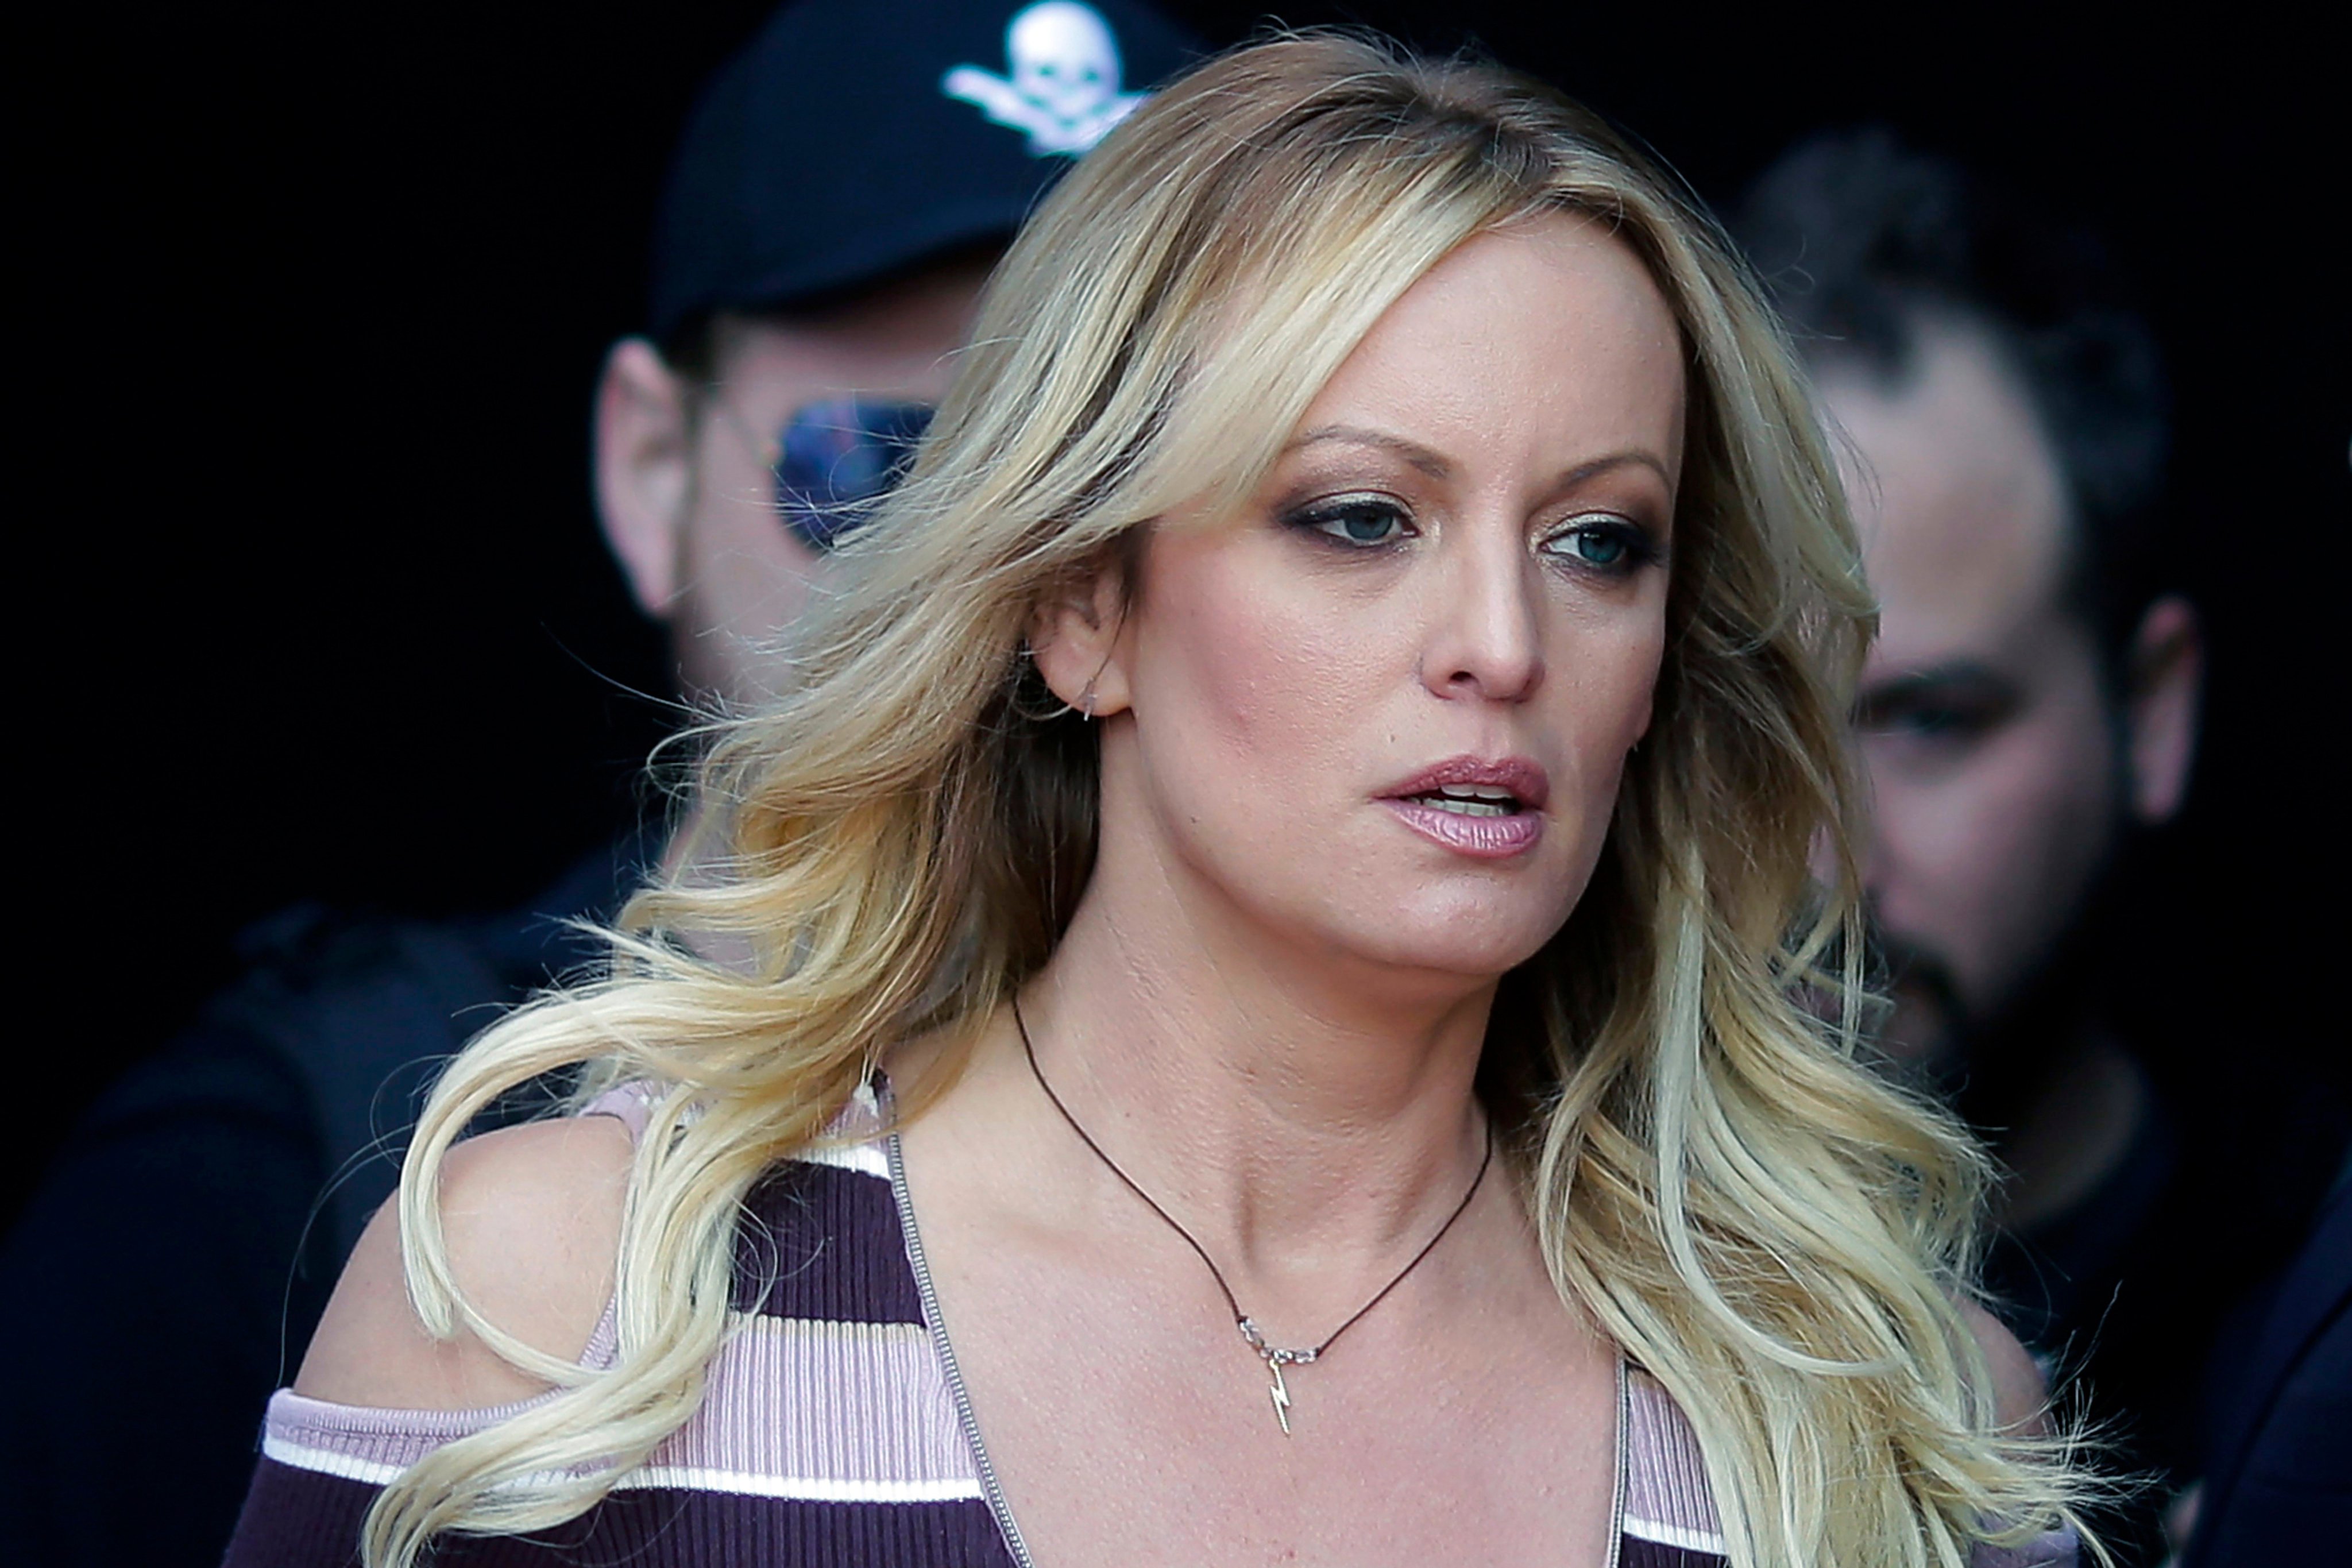 Stormy Daniels arrives at an event in Berlin in October 2018. Photo: AP